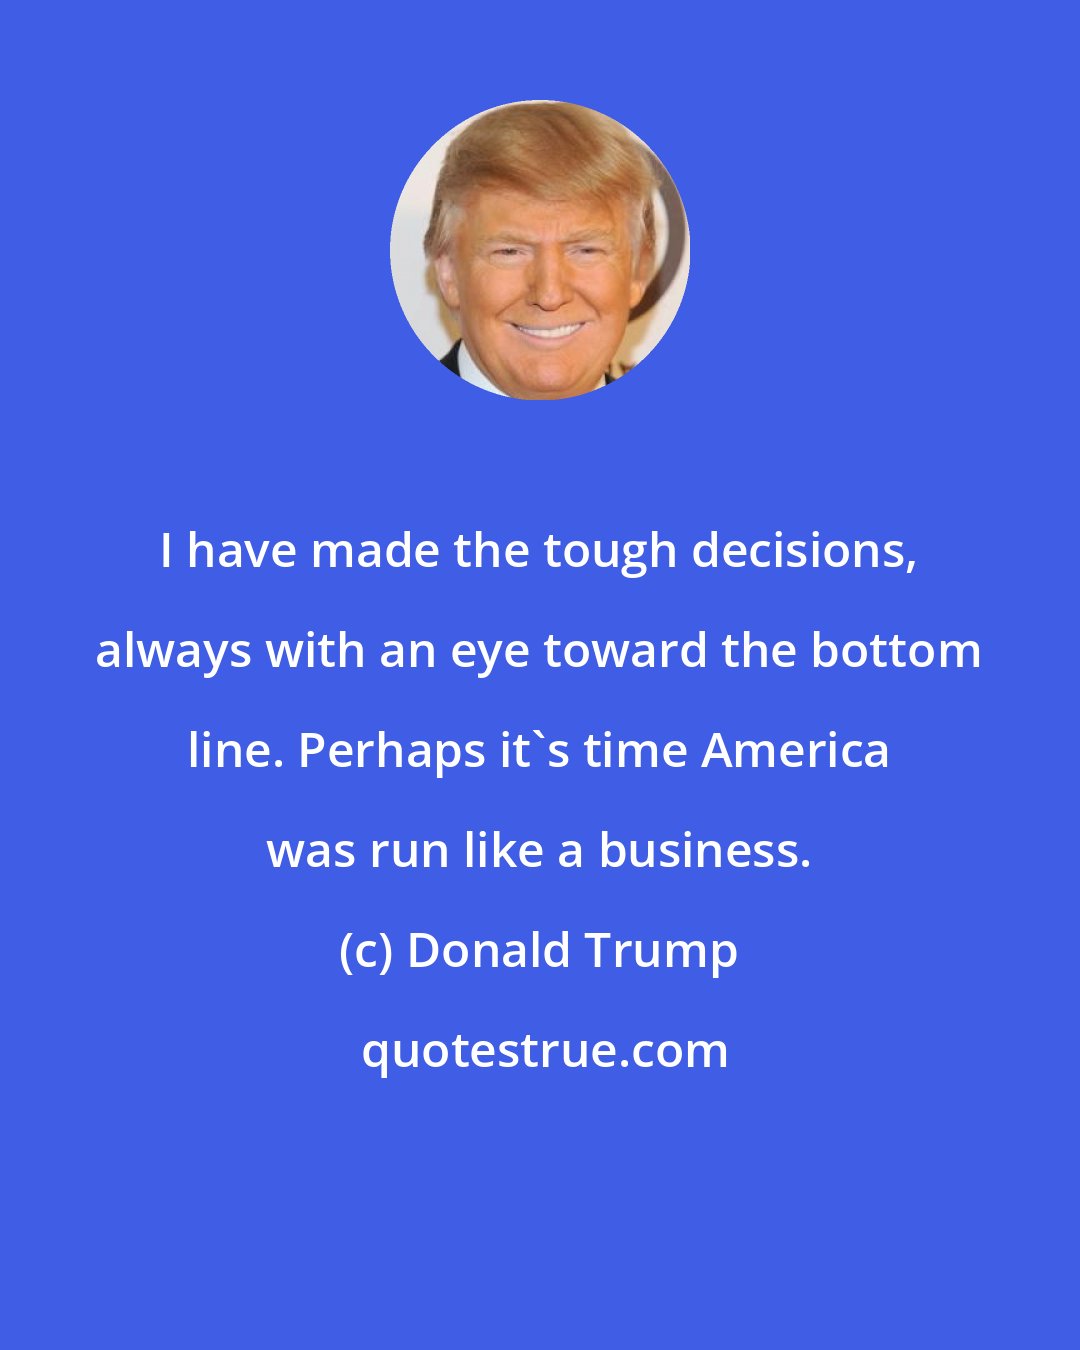 Donald Trump: I have made the tough decisions, always with an eye toward the bottom line. Perhaps it's time America was run like a business.